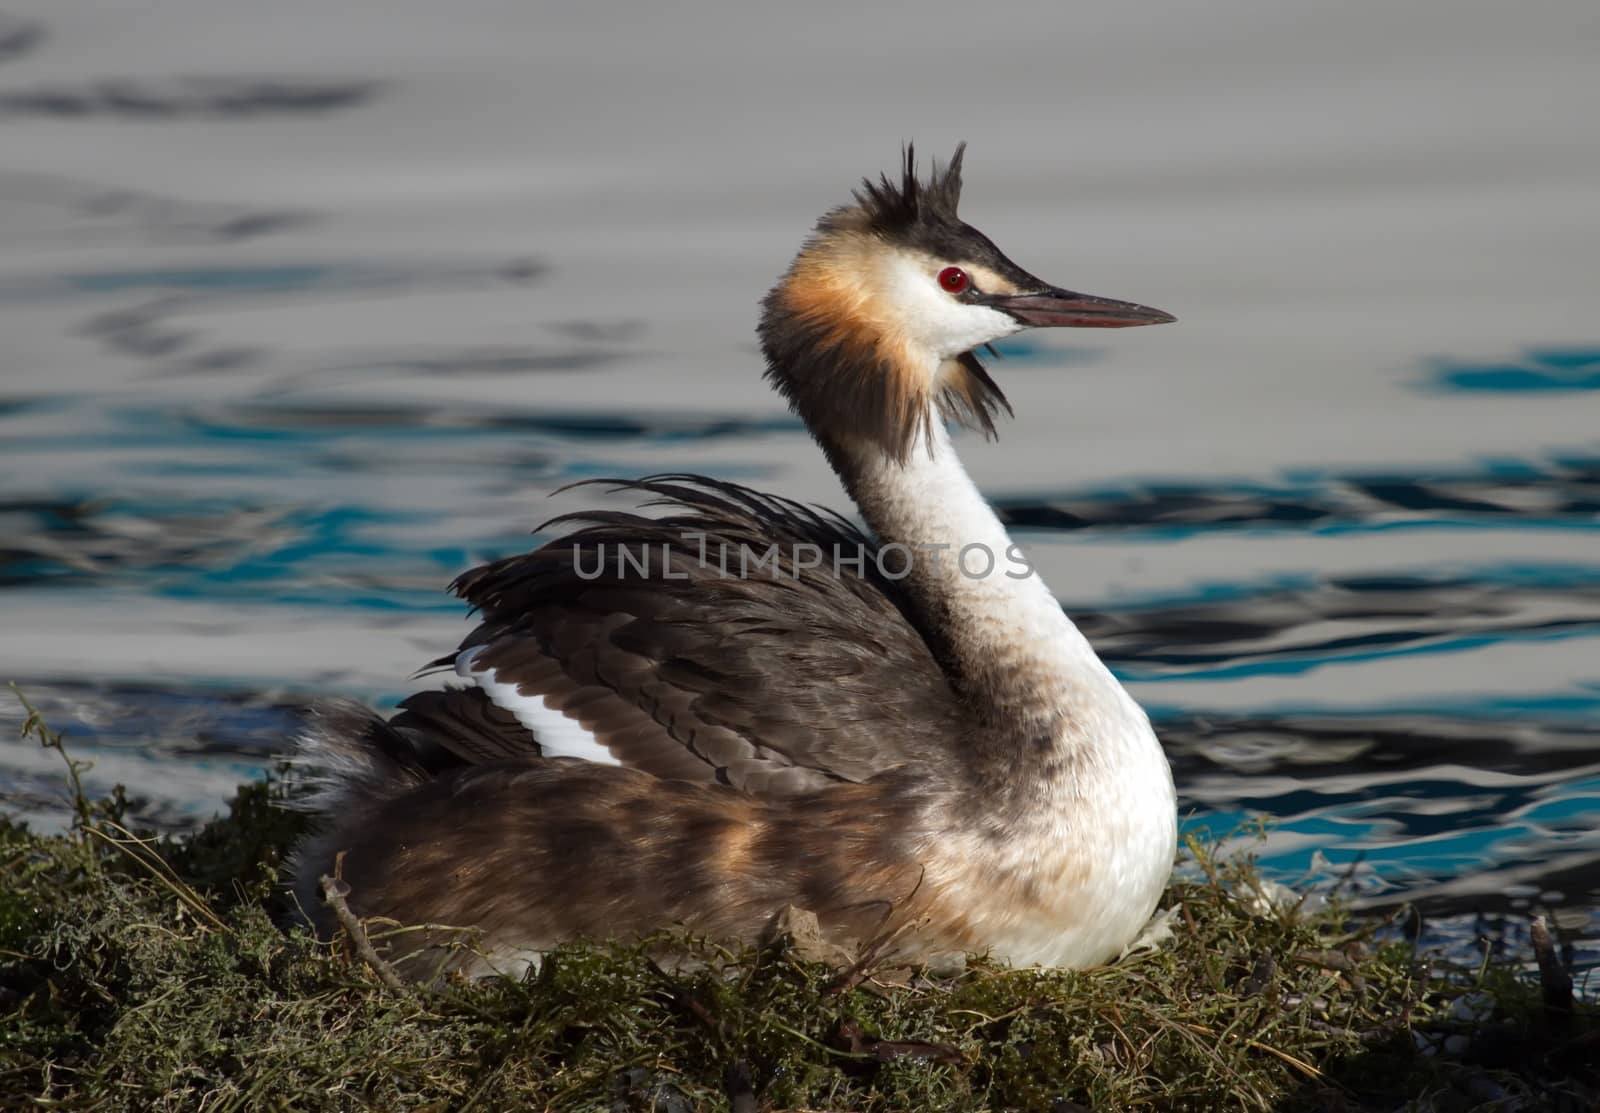 Crested grebe, podiceps cristatus, duck brooding nest by Elenaphotos21